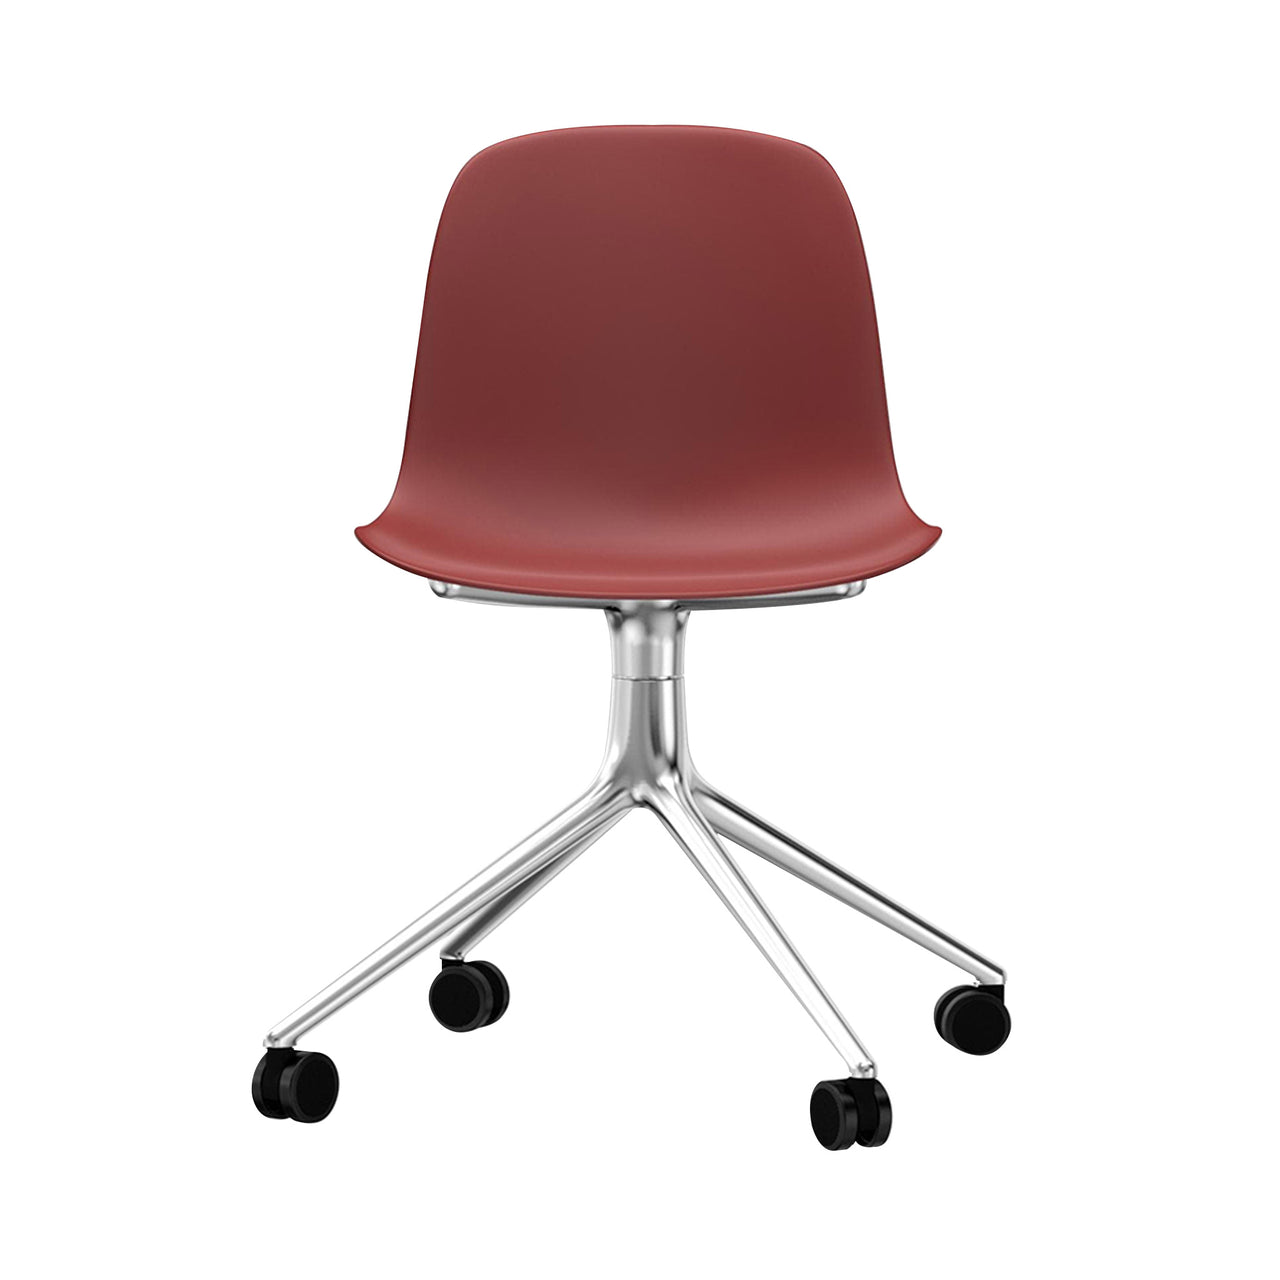 Form Chair: Swivel + Red + Aluminum + With Casters